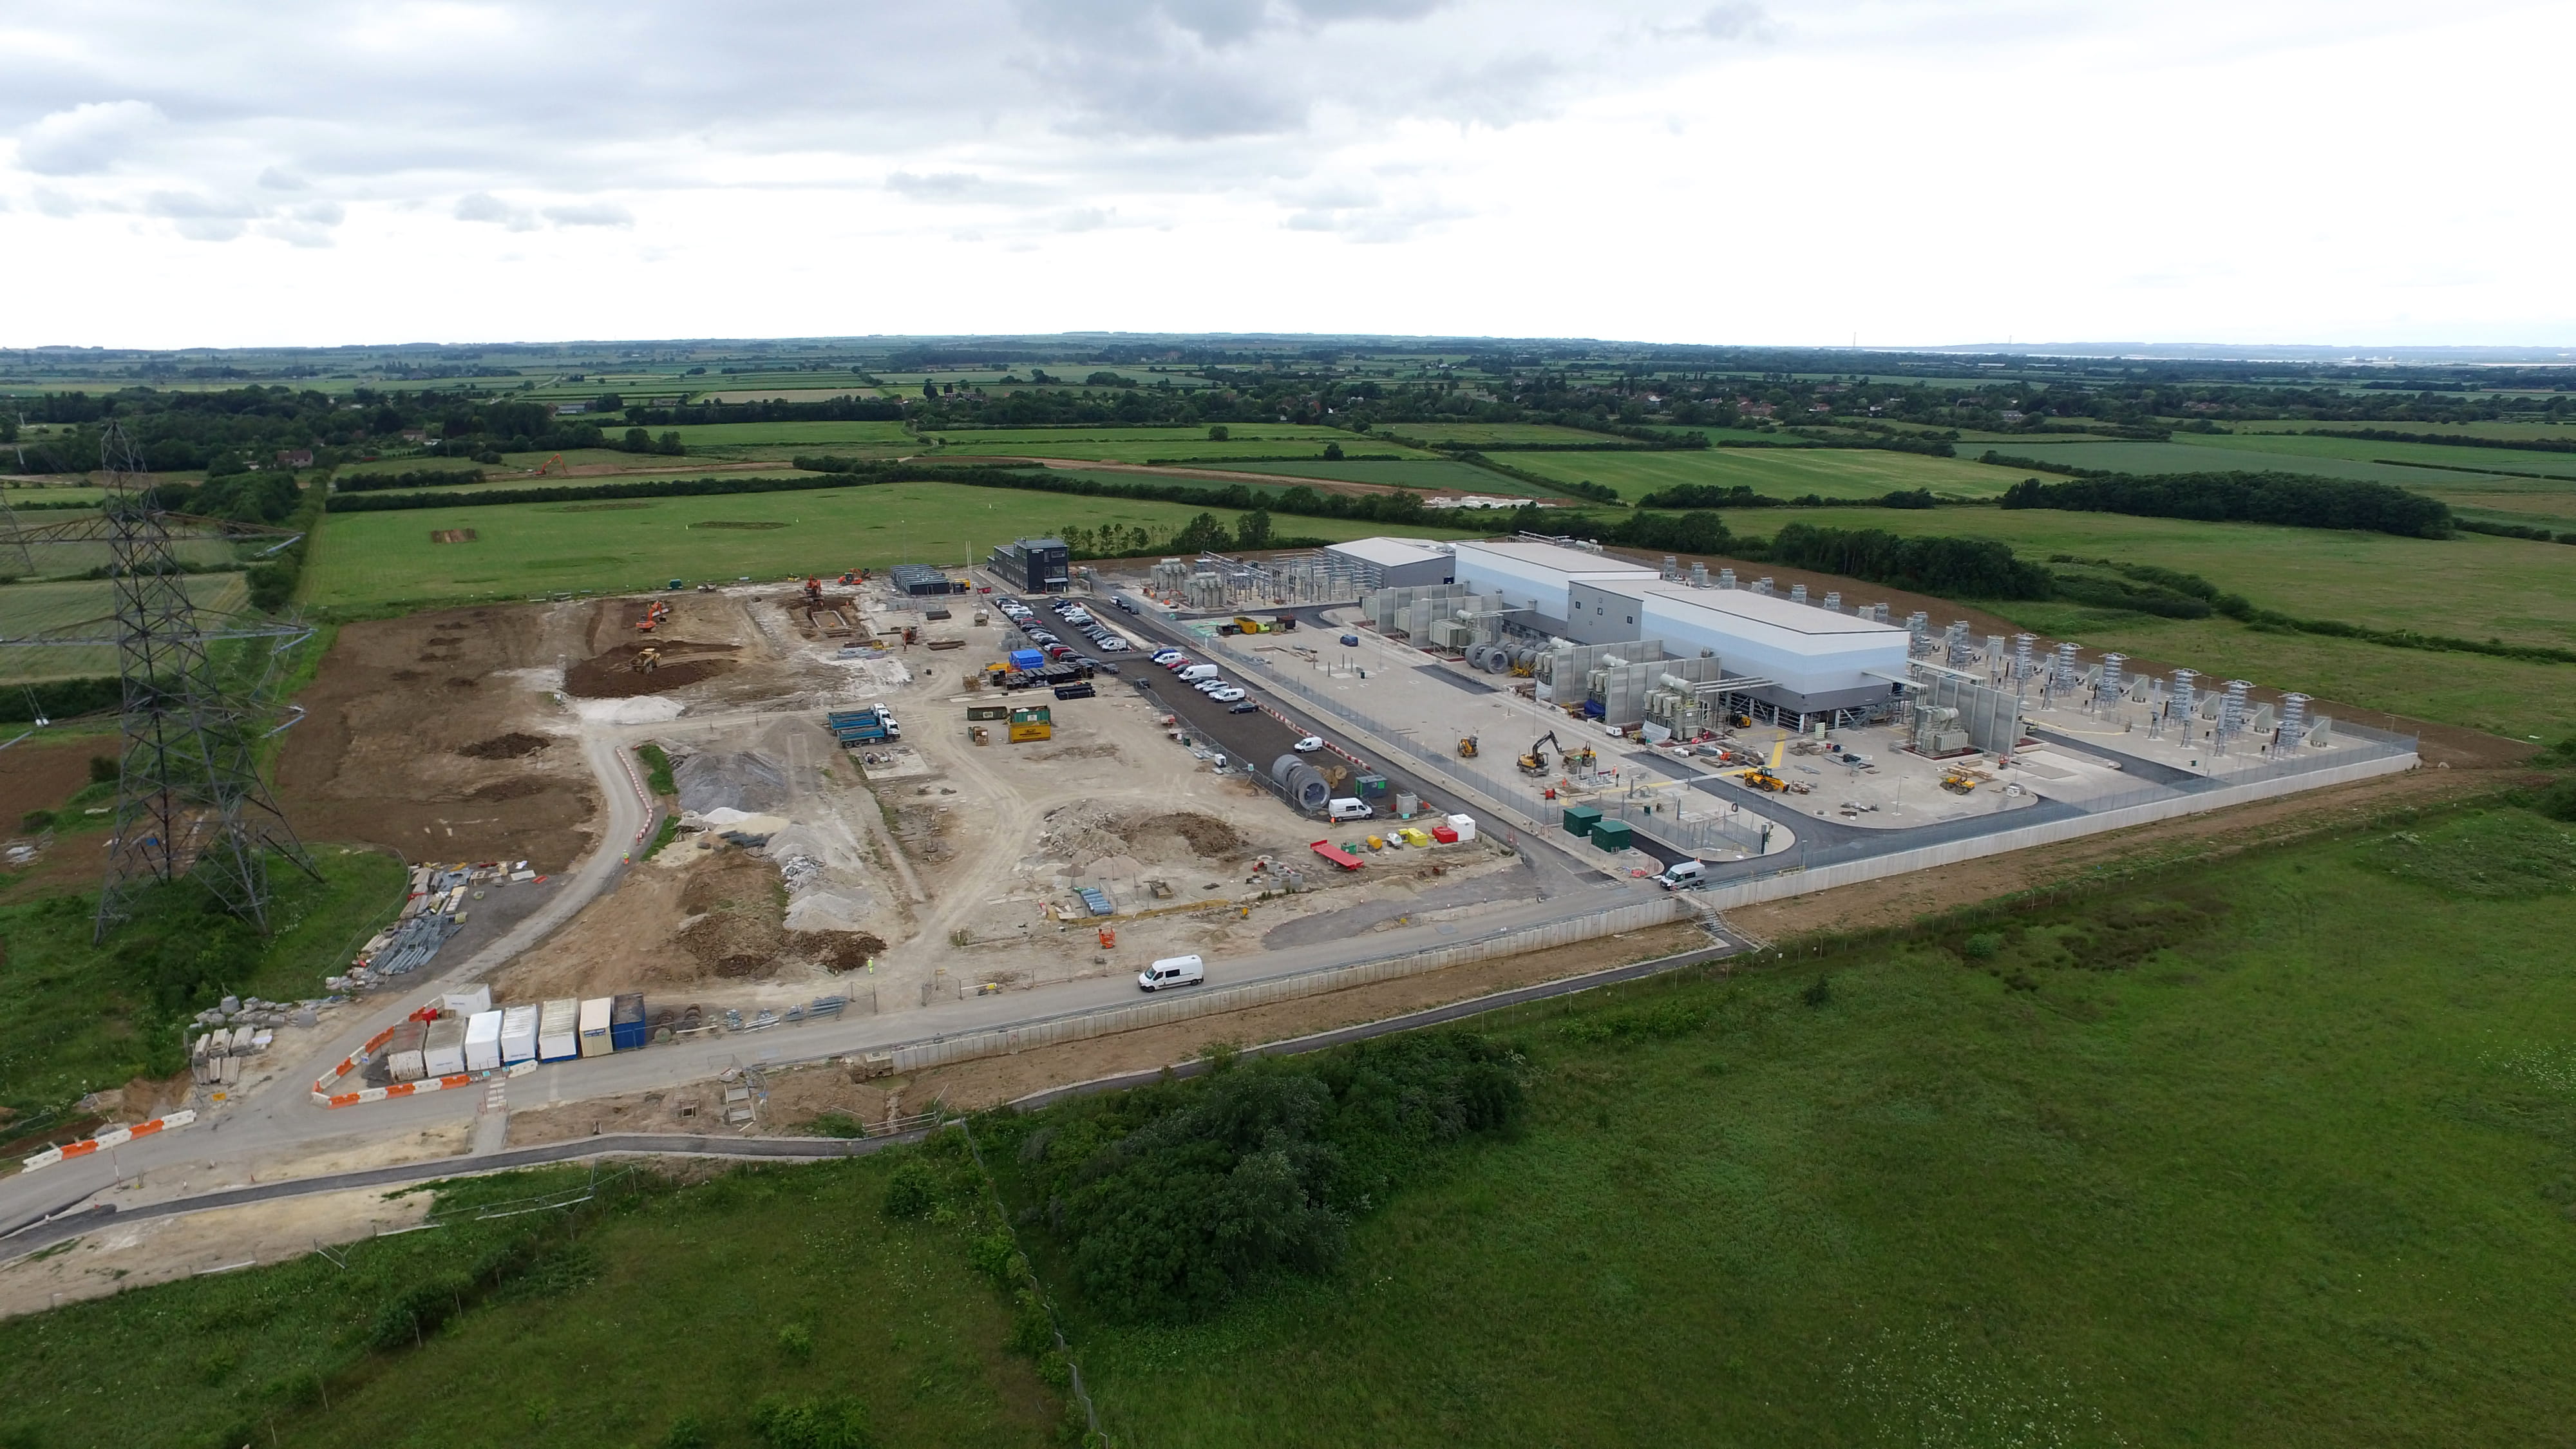 Aerial shot of North Killingholme site showing the Hornsea One substation and the adjacent land whereby preparatory works for Hornsea Two'ds substation have already begun